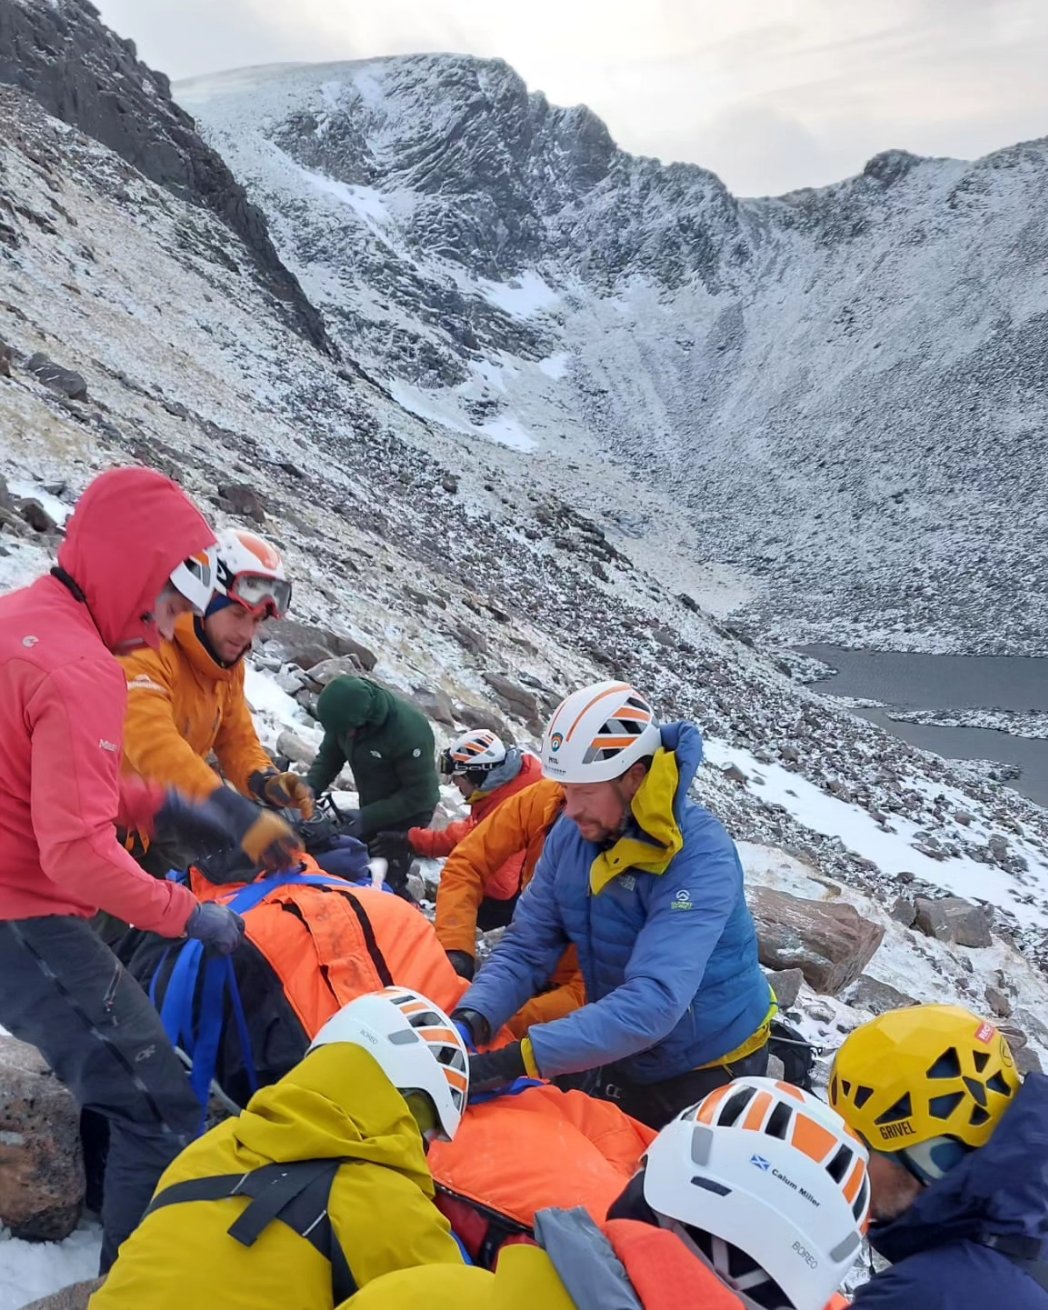 A man, in his 30s, fell around 80m in Coire an t-Sneachda, sliding on compacted snow below Jacob’s Ladder and sustaining injuries to his chest and lower legs.